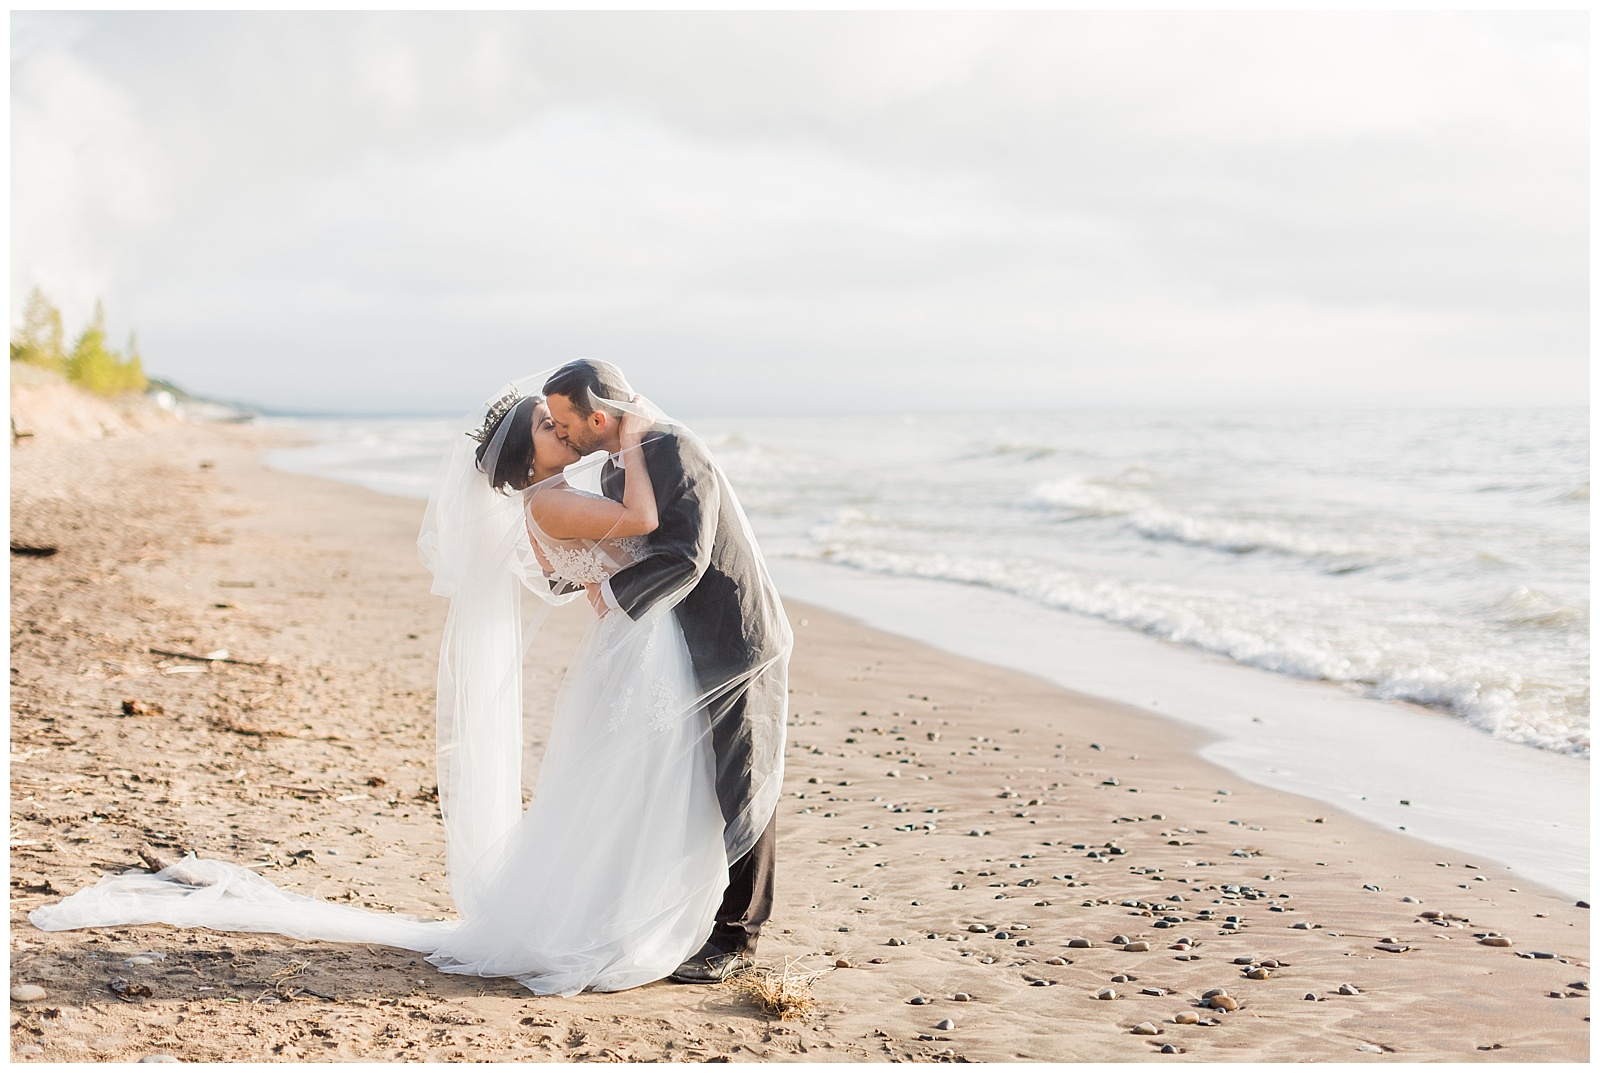 Bride and groom kiss on beach in Traverse City during Northern Michigan beach wedding.